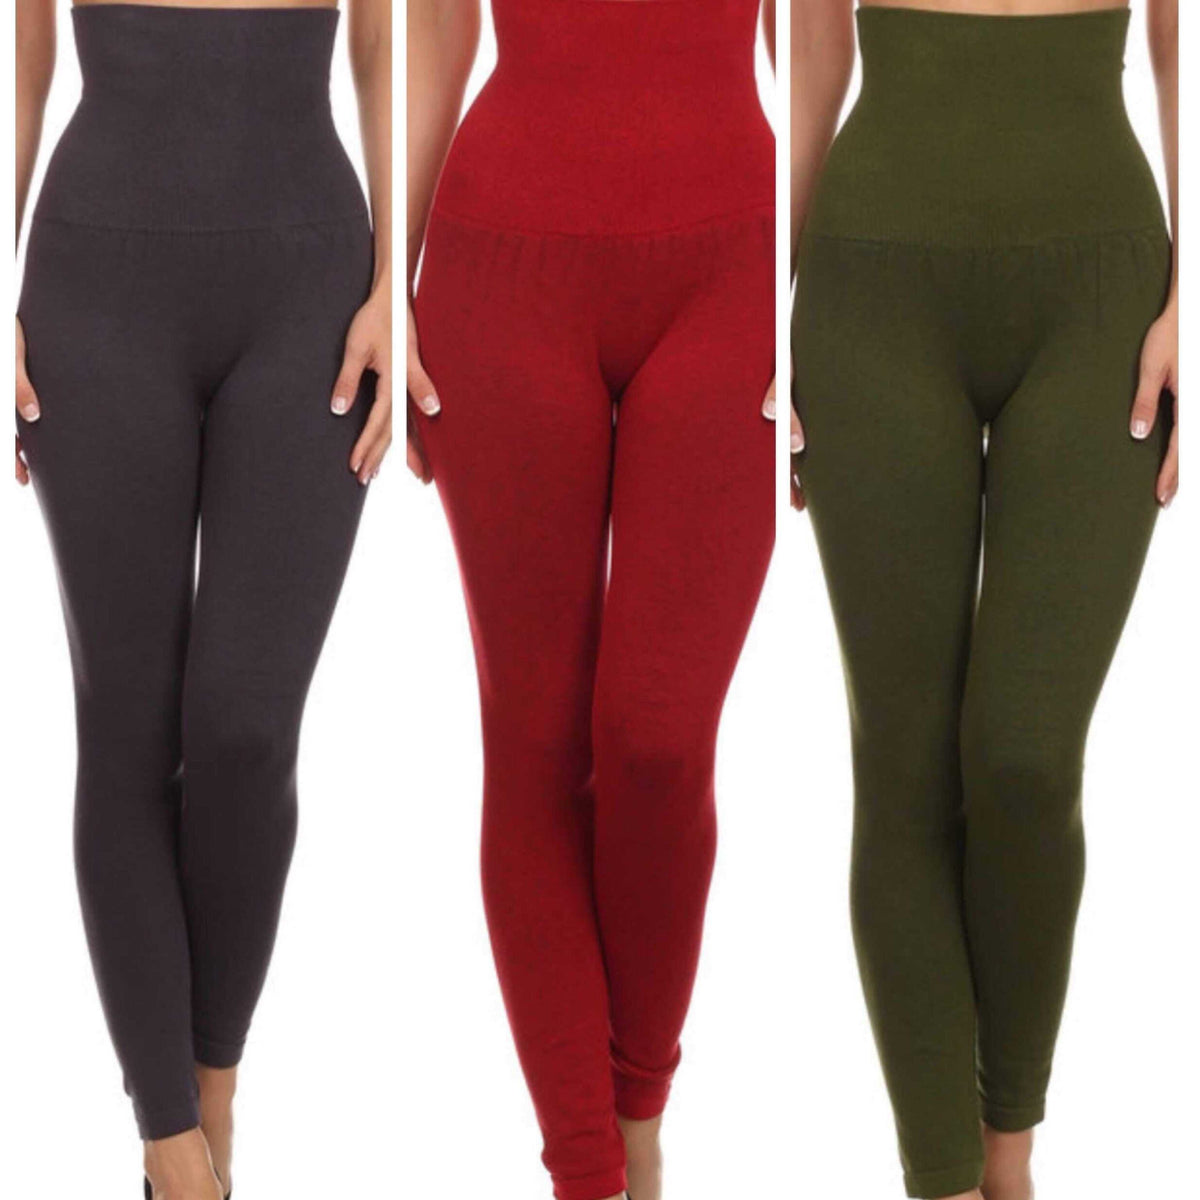 Bottoms TheBrownEyedGirl Boutique – tagged Yelete Leggings